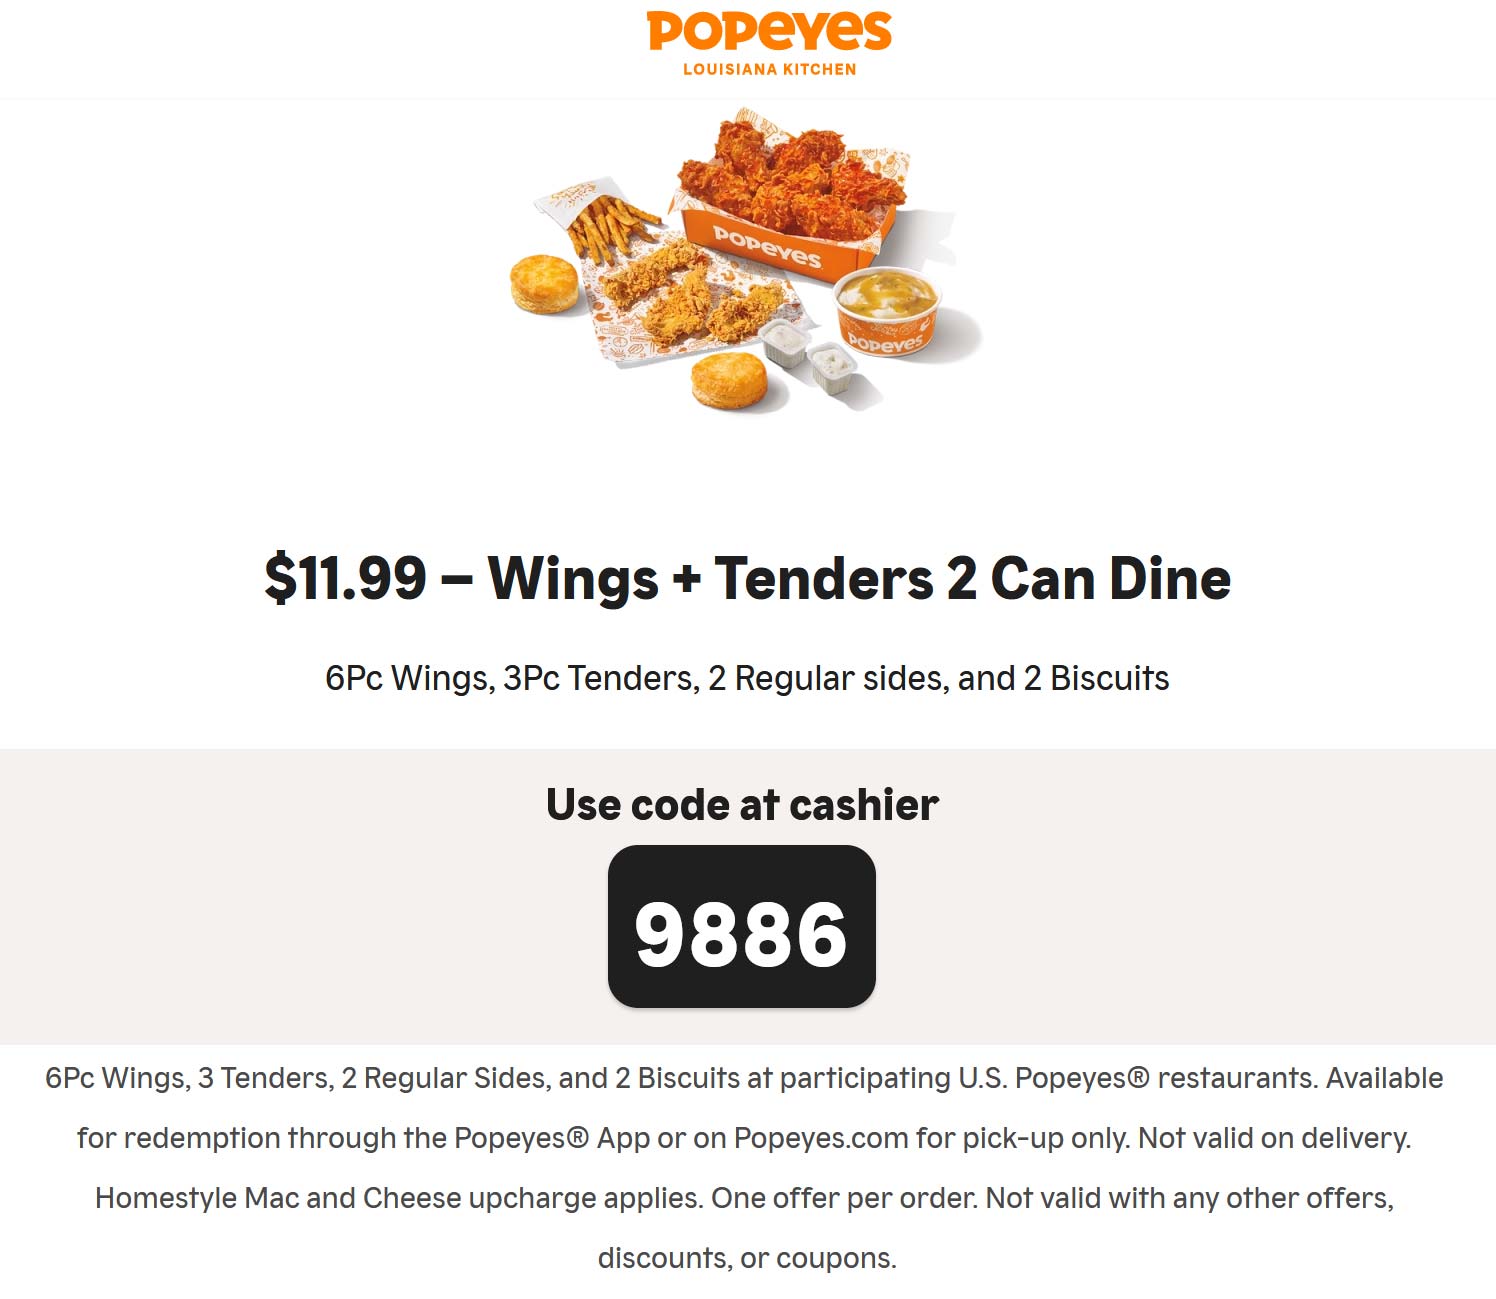 Popeyes restaurants Coupon  6pc wings + 3pc chicken tenders + 2 sides + 2 biscuits = $12 at Popeyes #popeyes 